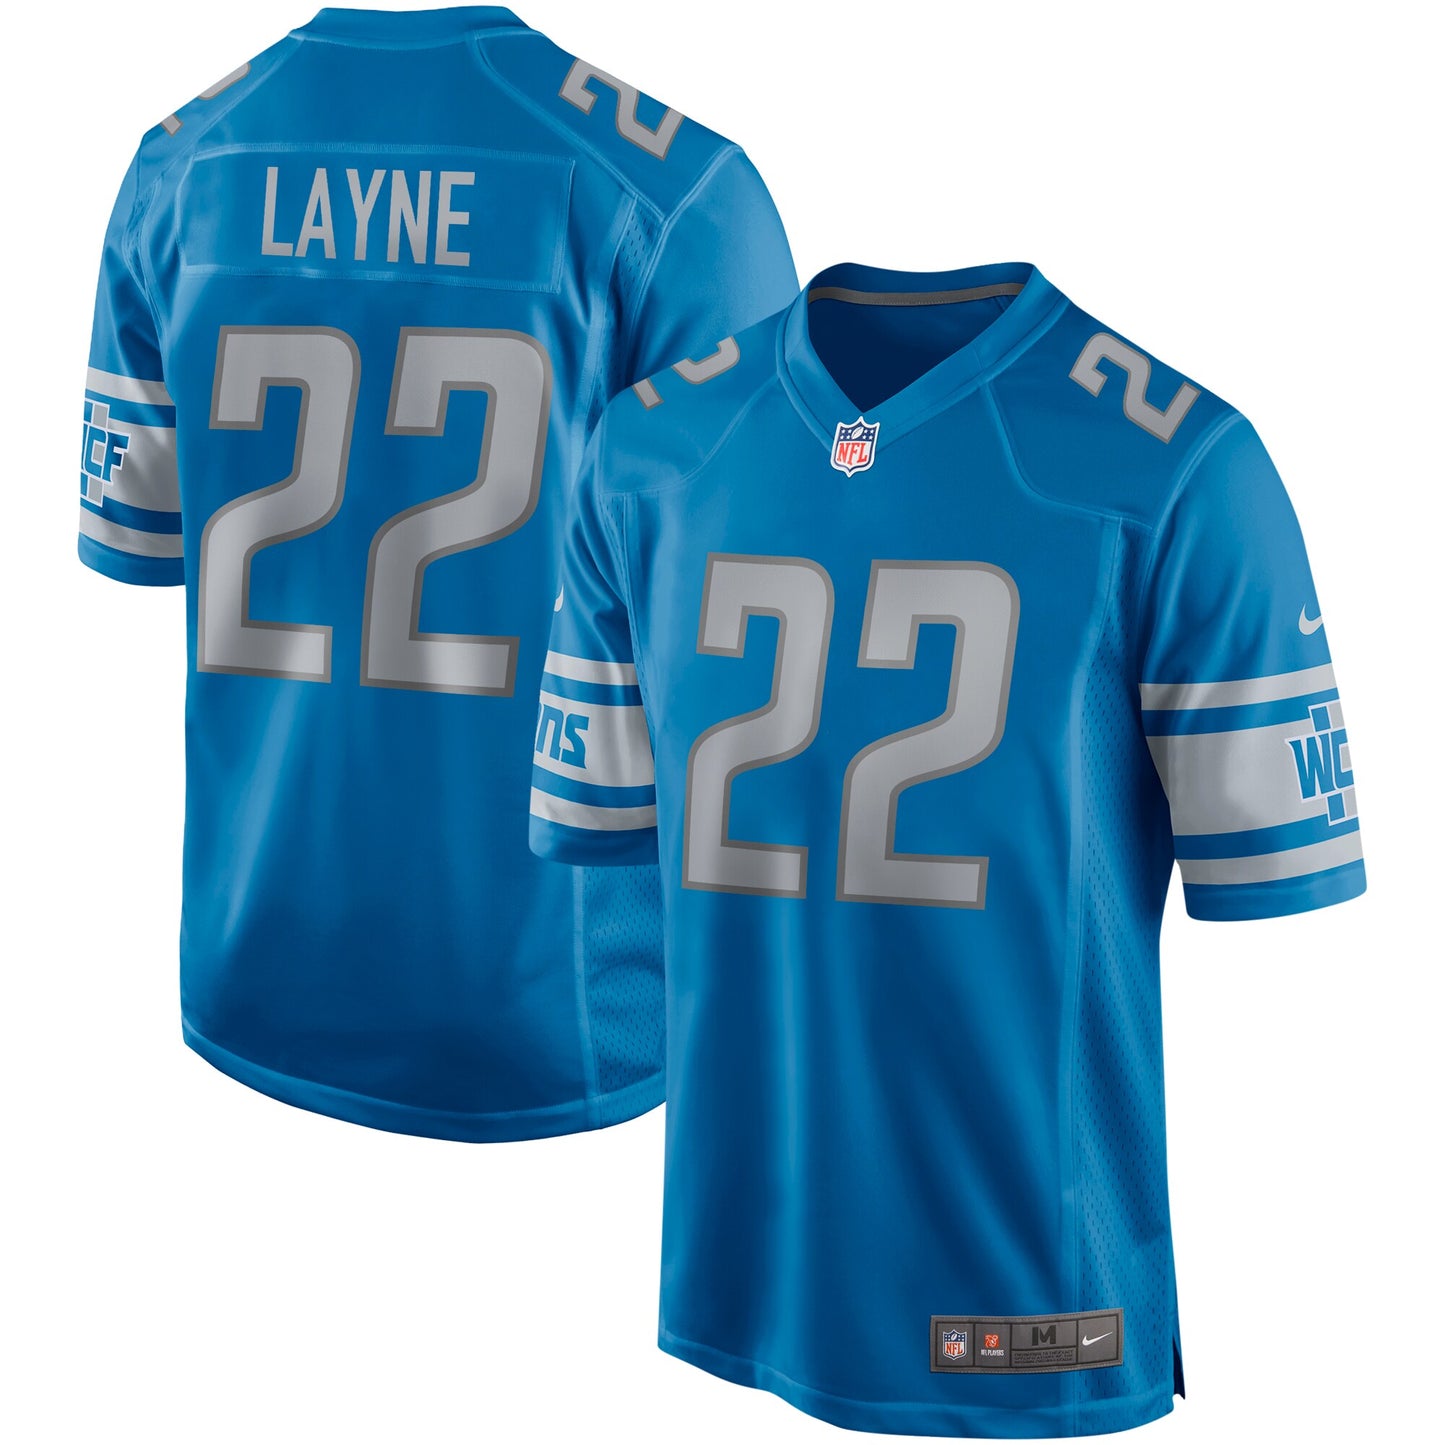 Bobby Layne Detroit Lions Nike Game Retired Player Jersey - Blue